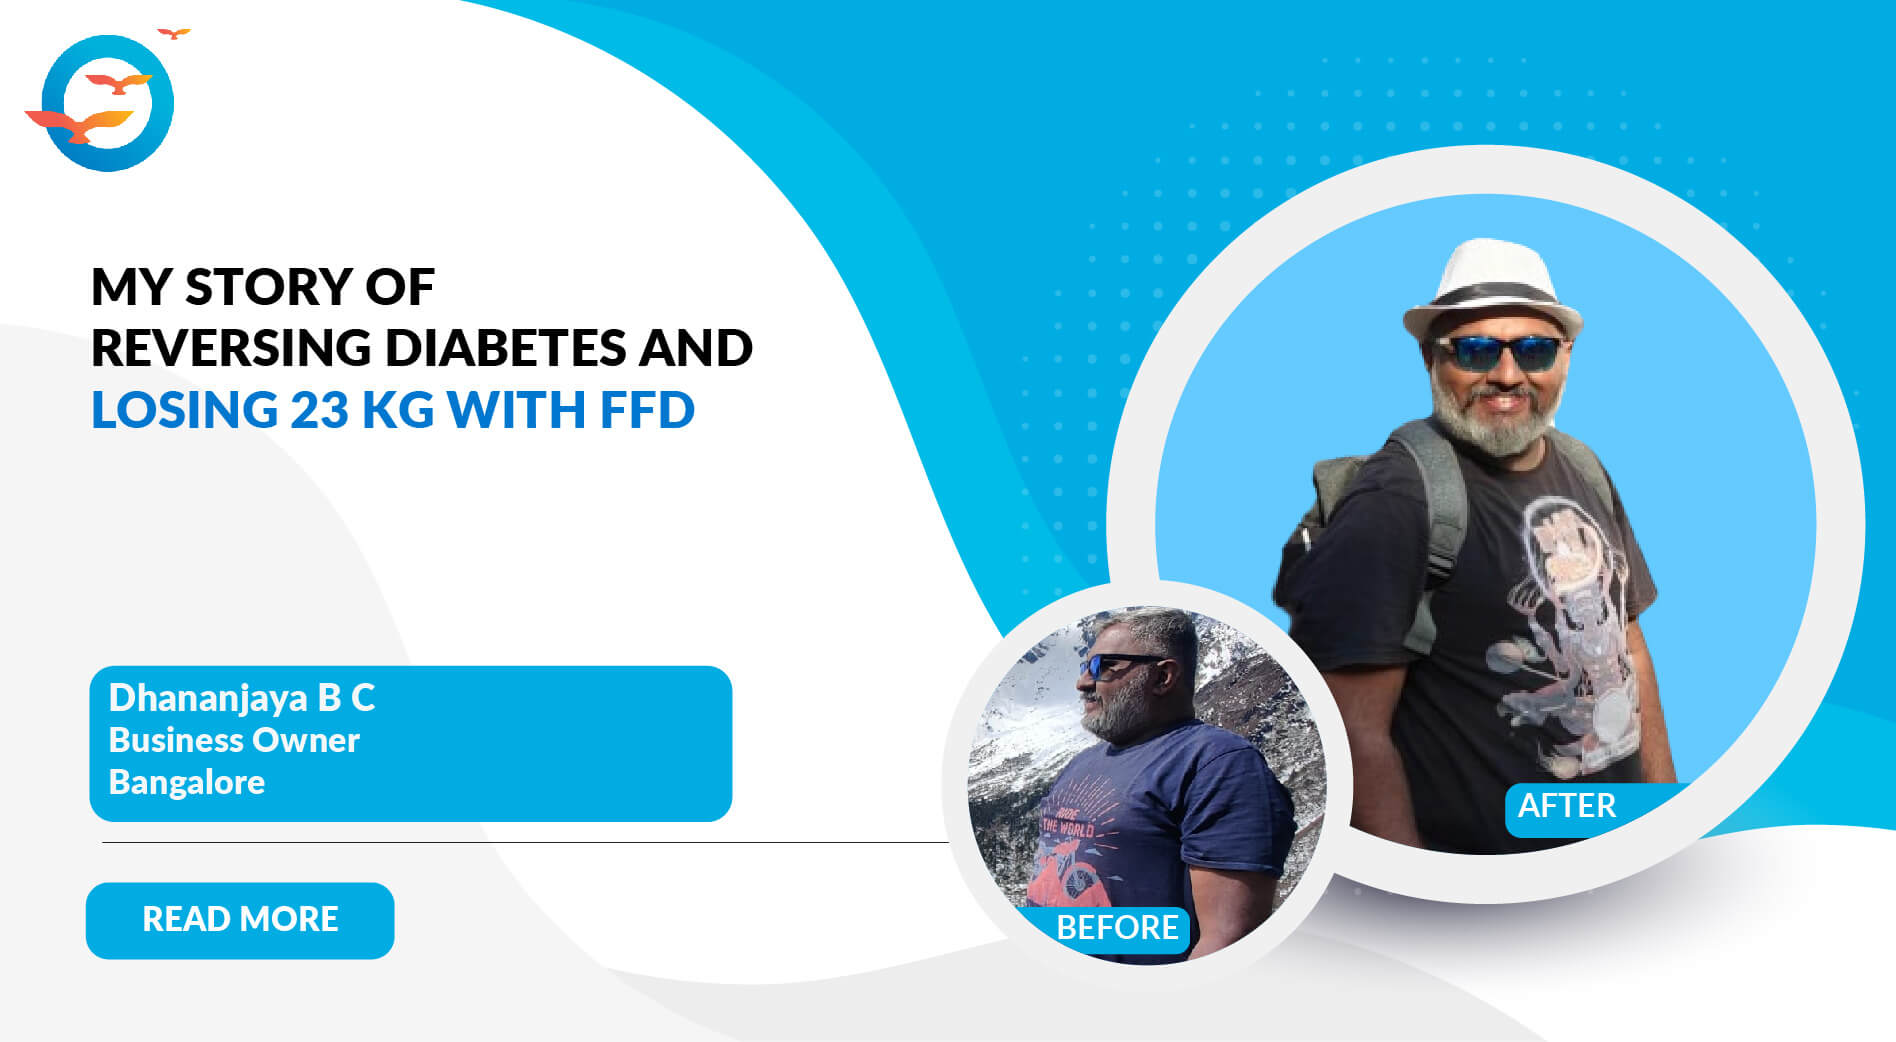  Transforming Health: My FFD Experience of Reversing Diabetes and Losing 23 kg